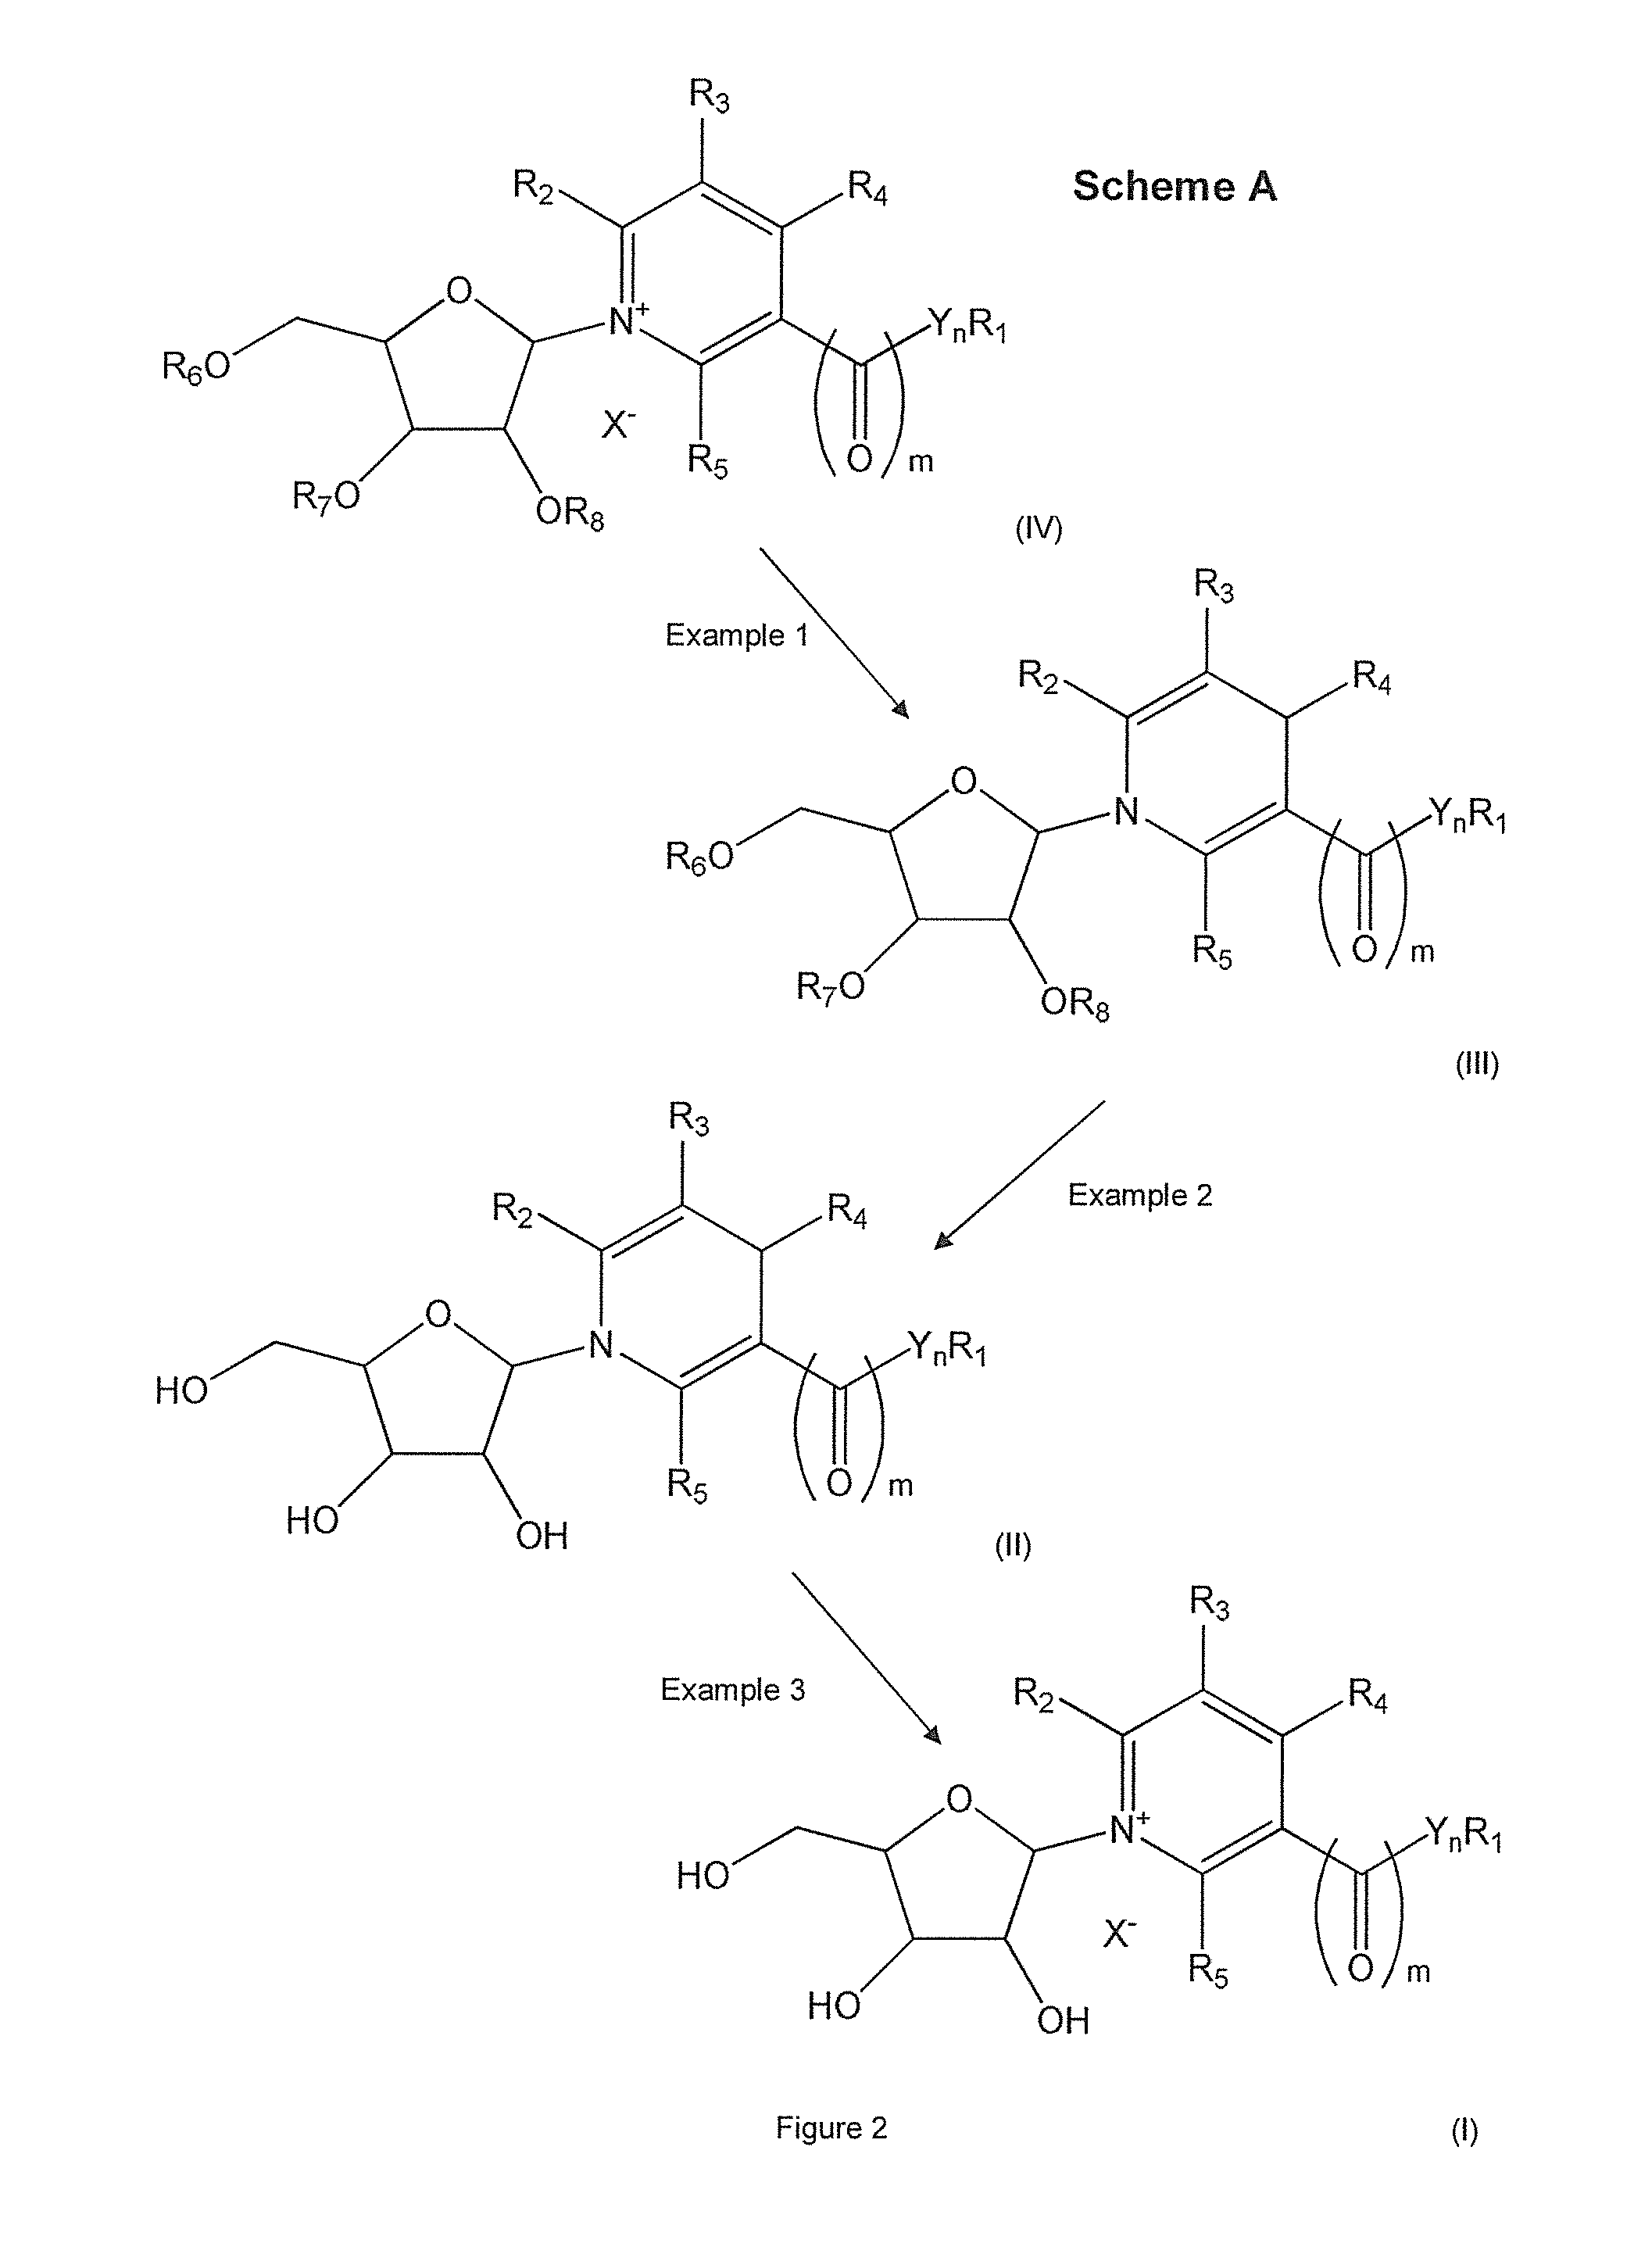 Methods of preparing nicotinamide riboside and derivatives thereof